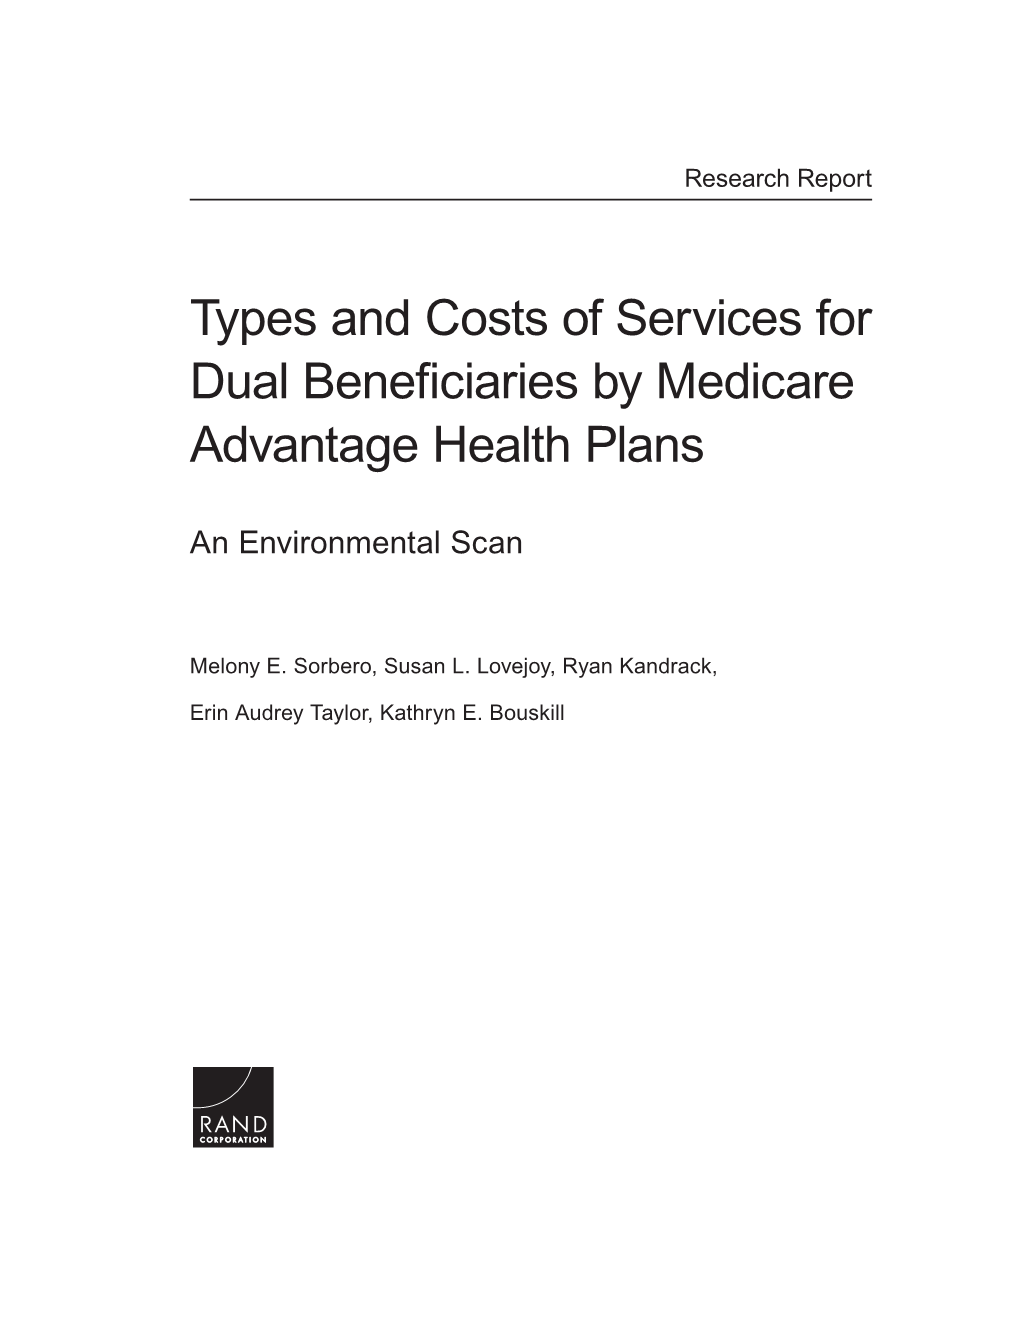 Types and Costs of Services for Dual Beneficiaries by Medicare Advantage Health Plans